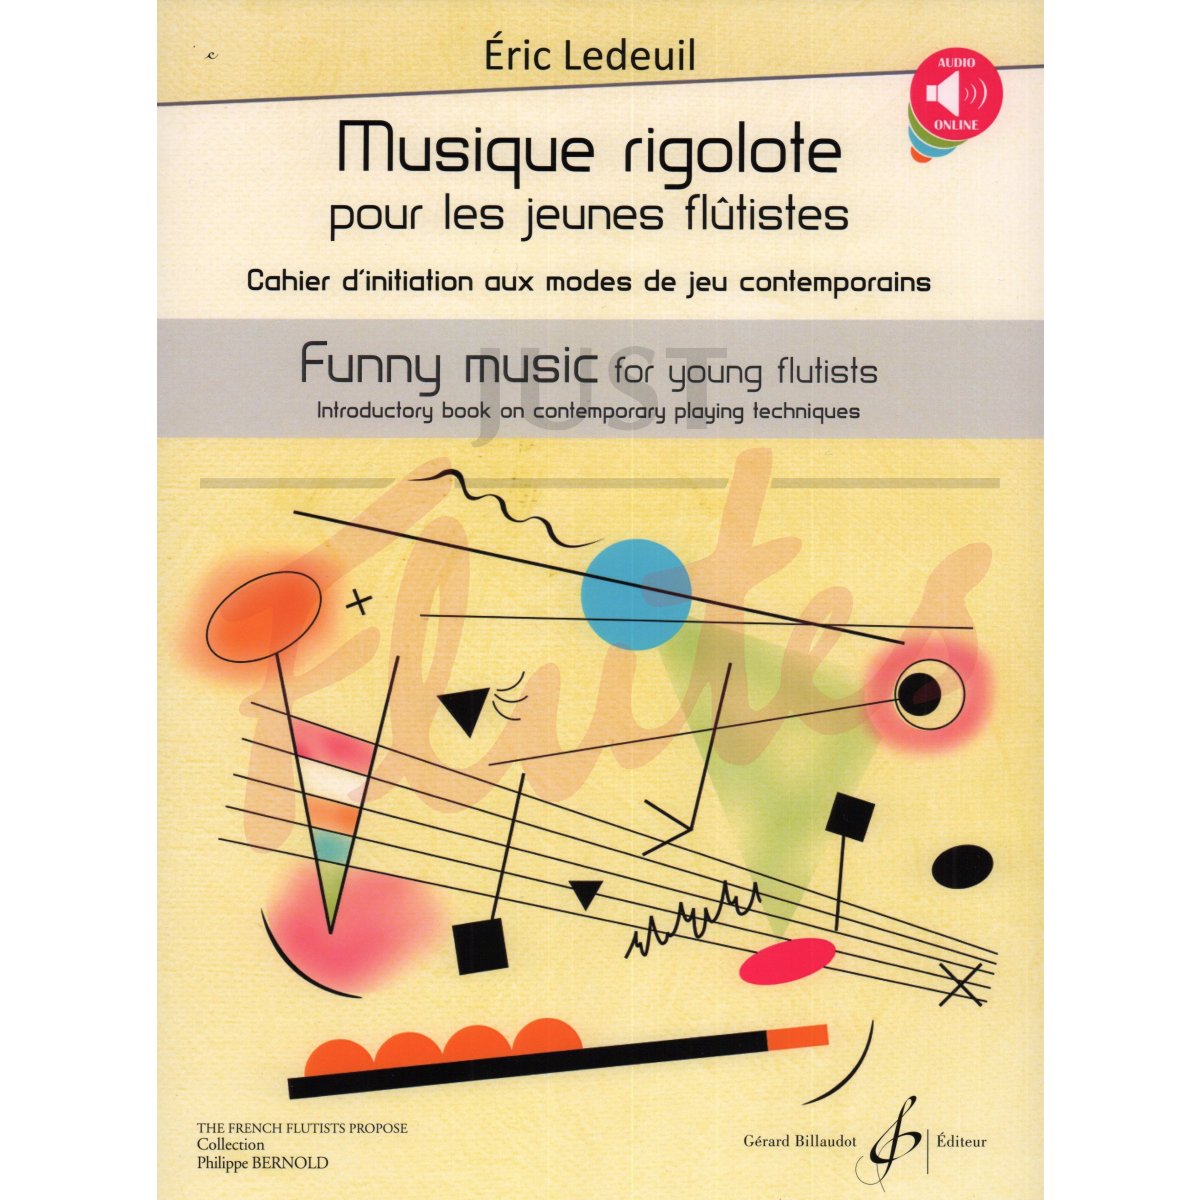 Funny Music for Young Flutists: Introductory book on Contemporary Playing Technique for Flute